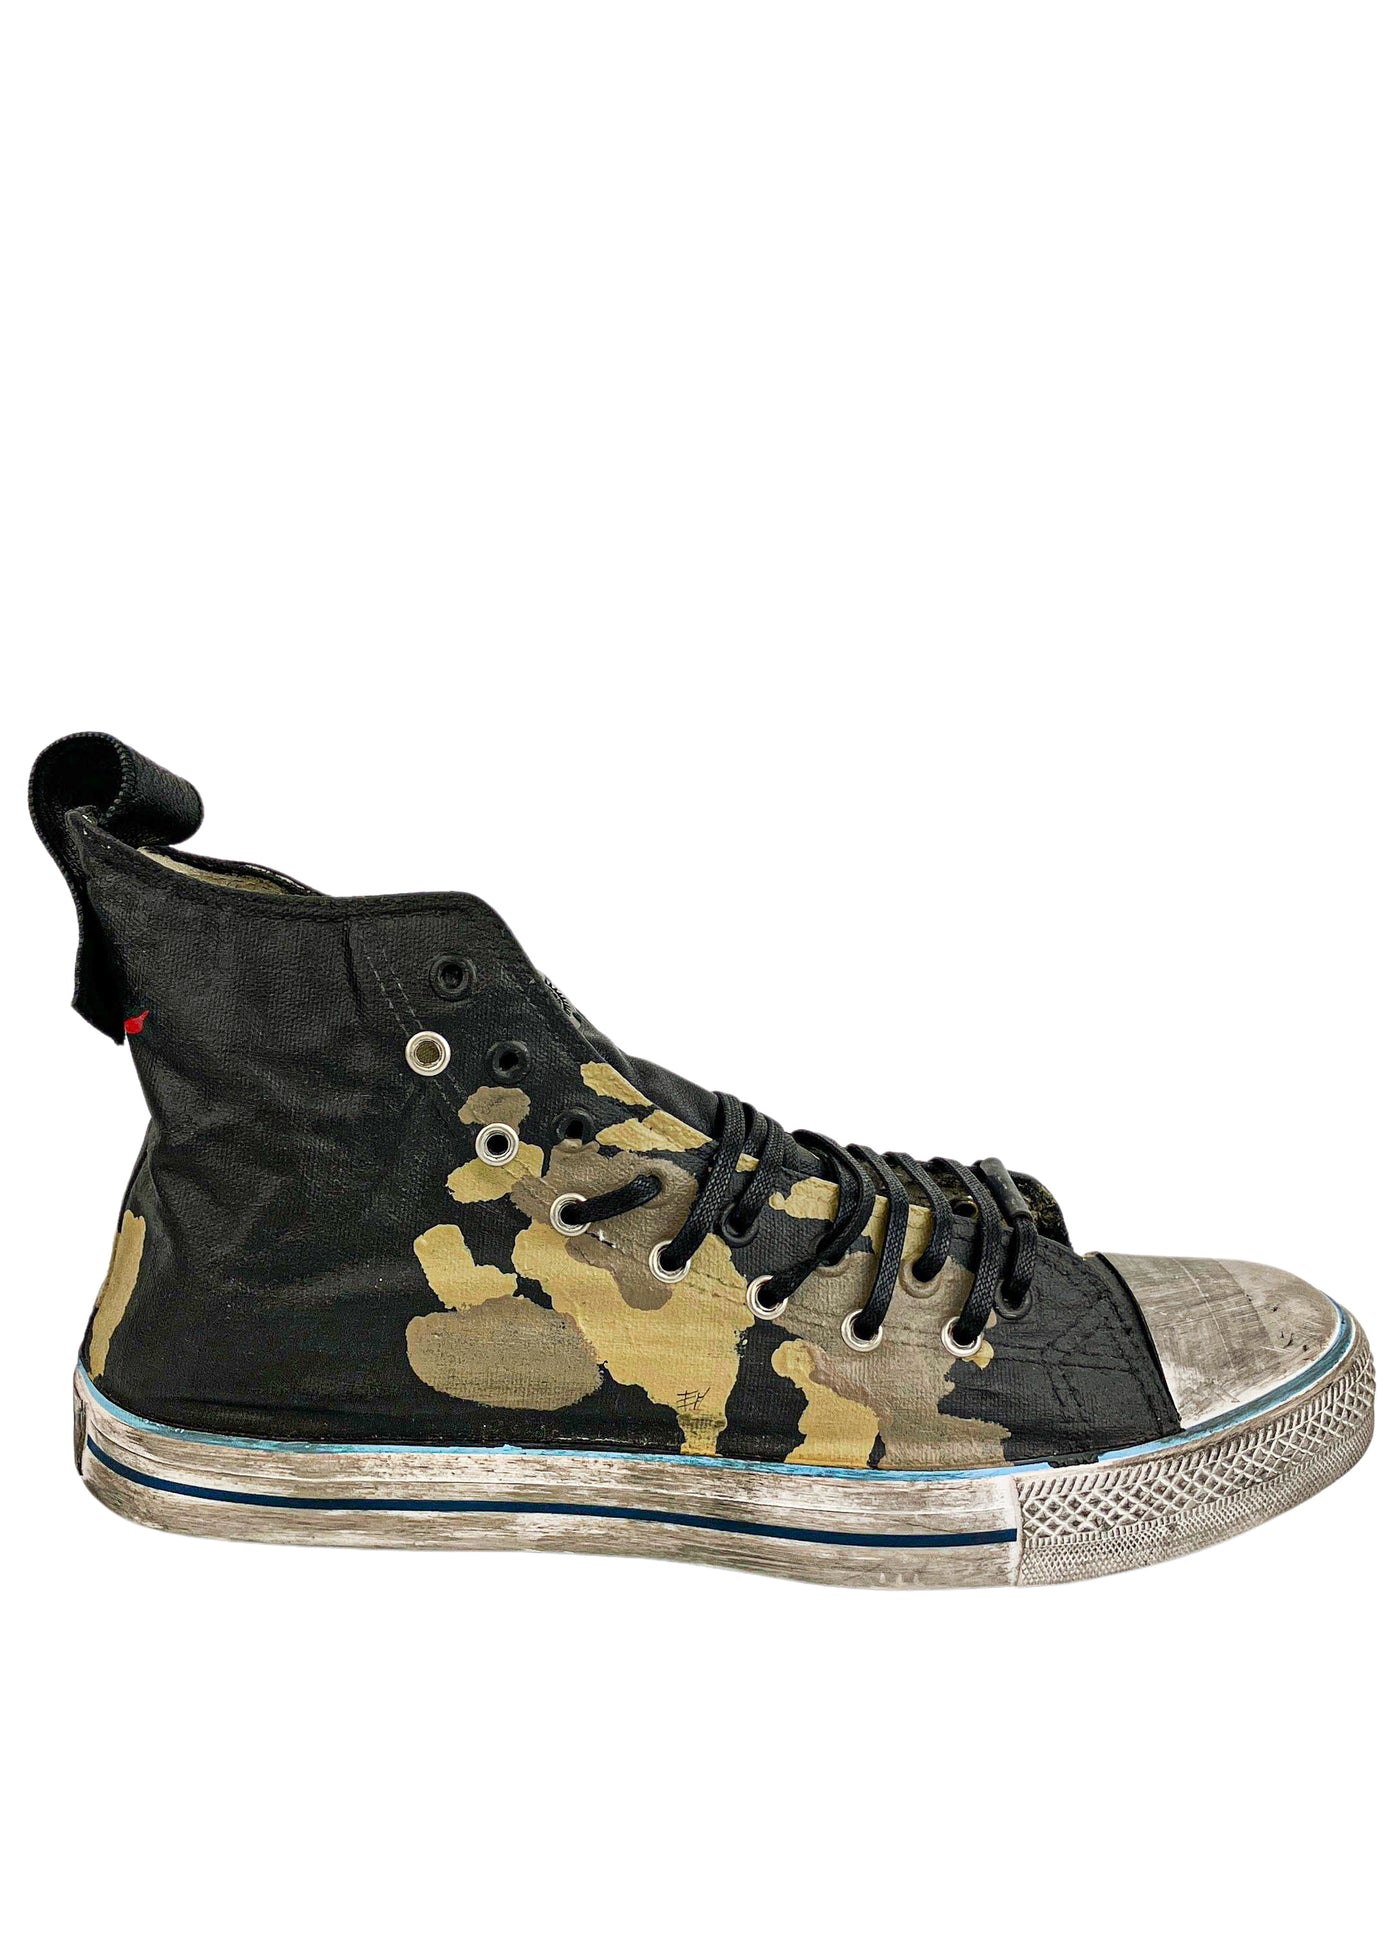 Dioniso High Top Camo Sneakers - Discounts on Dioniso at UAL